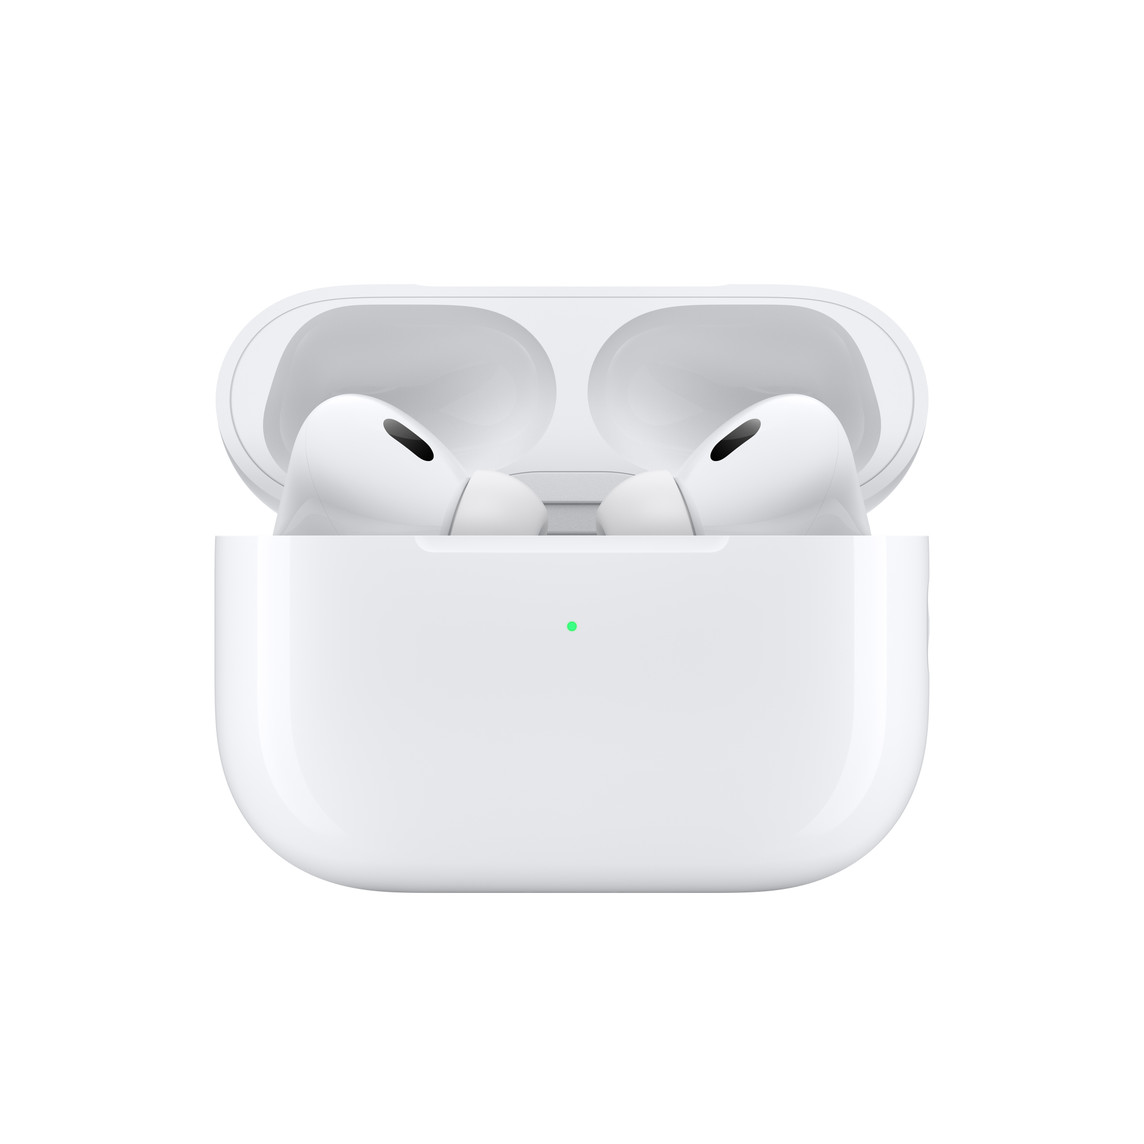 Does AirPods Pro Have Good Bass? 13